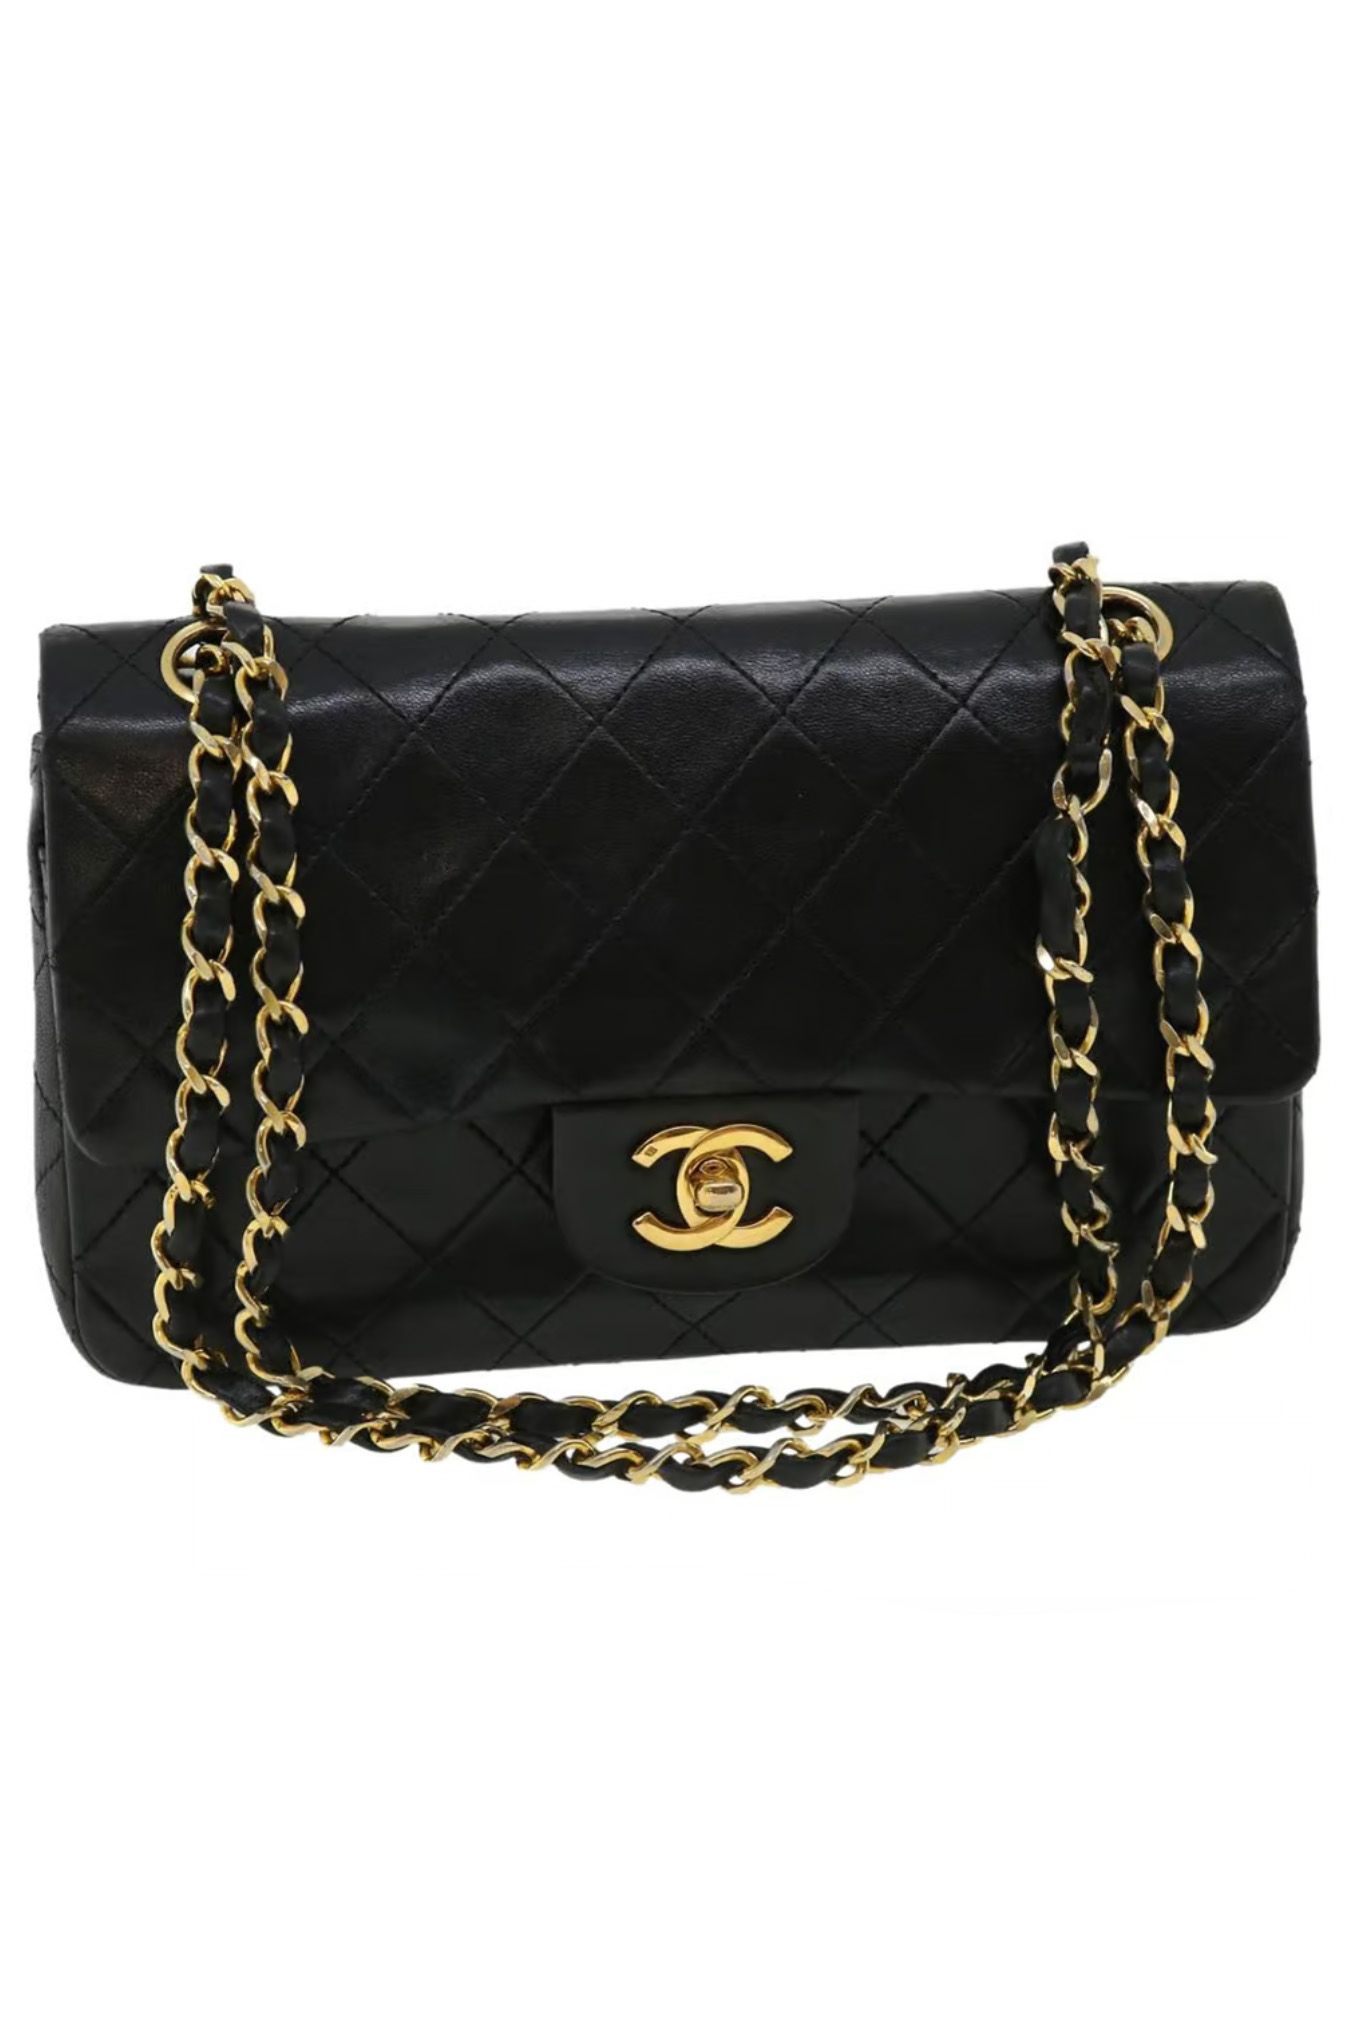 chanel purse how much